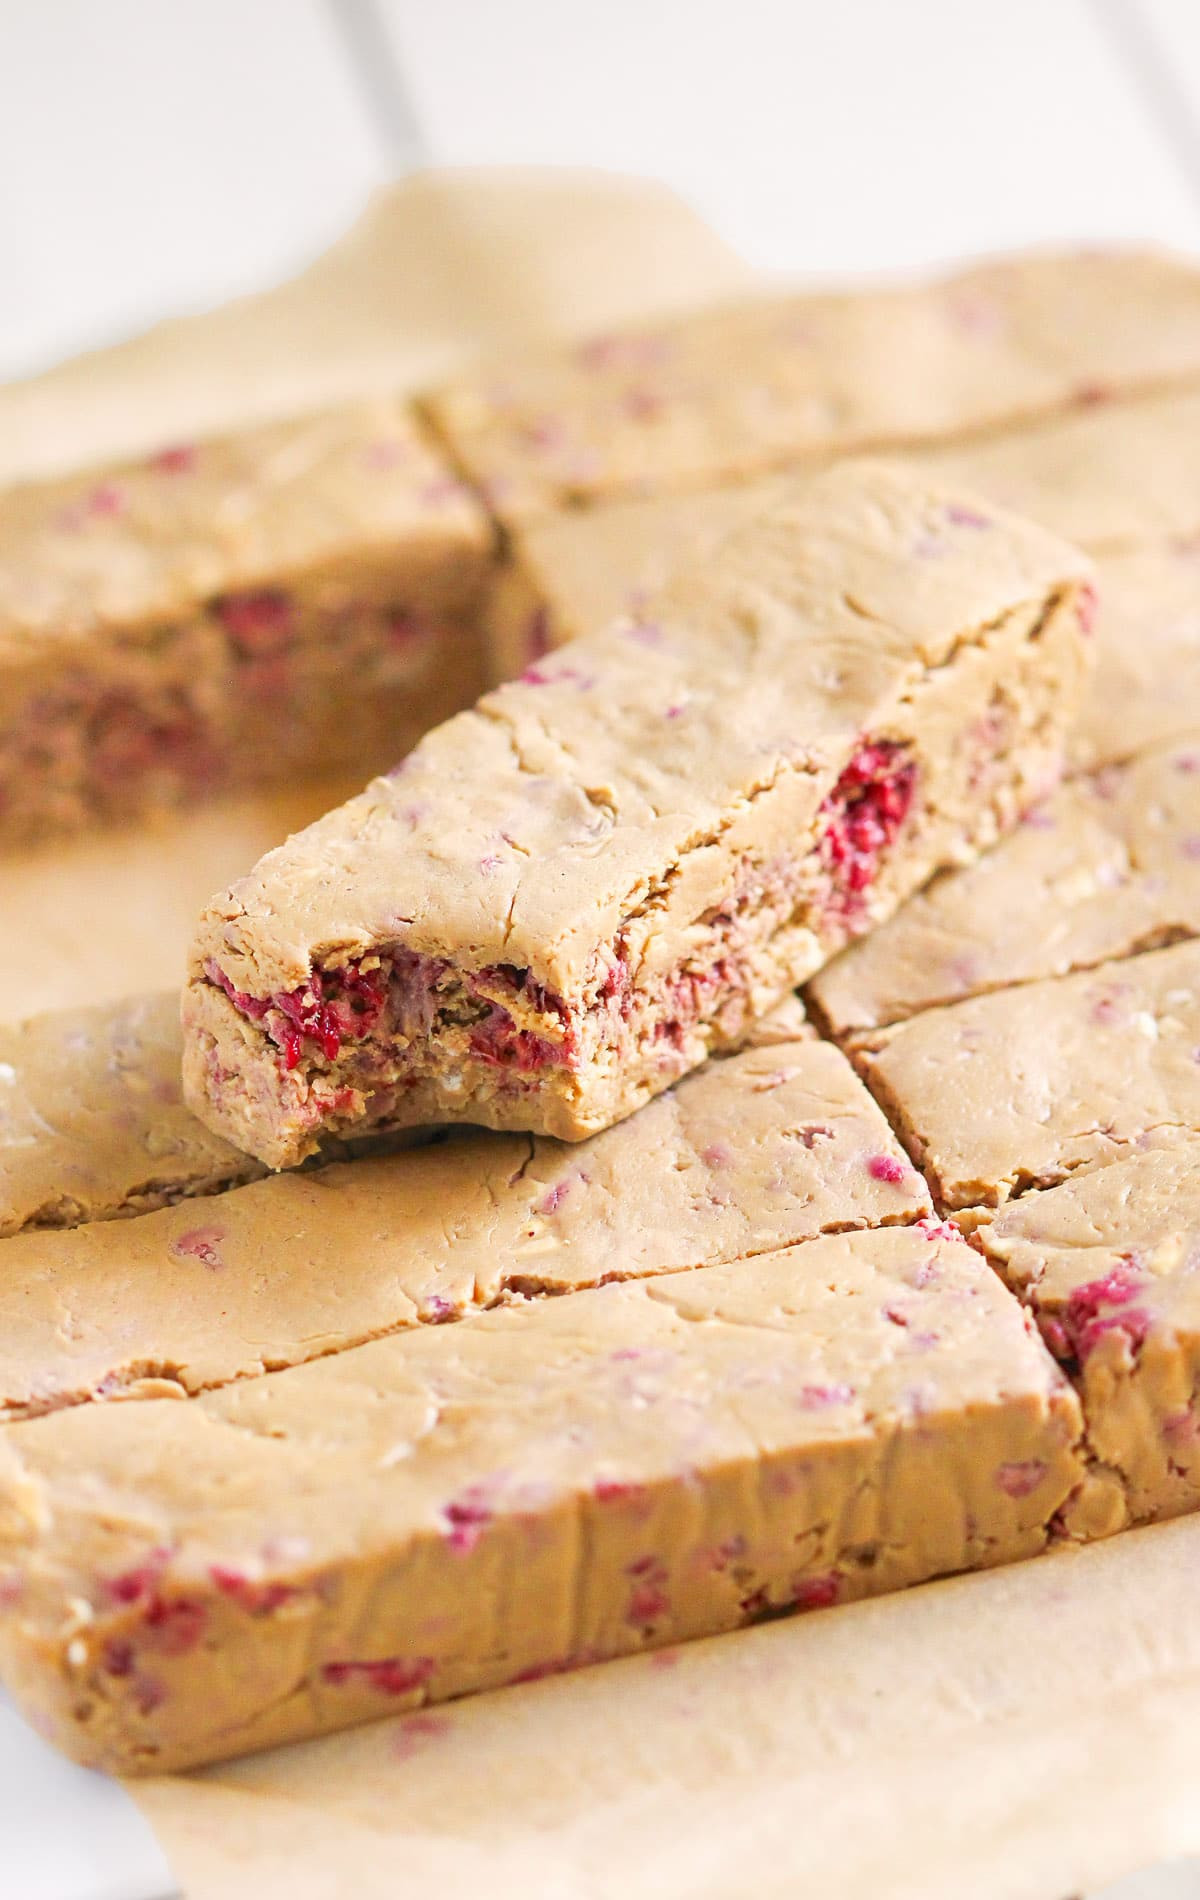 Healthy Protein Desserts
 Healthy Peanut Butter & Jelly DIY Protein Bars Recipe